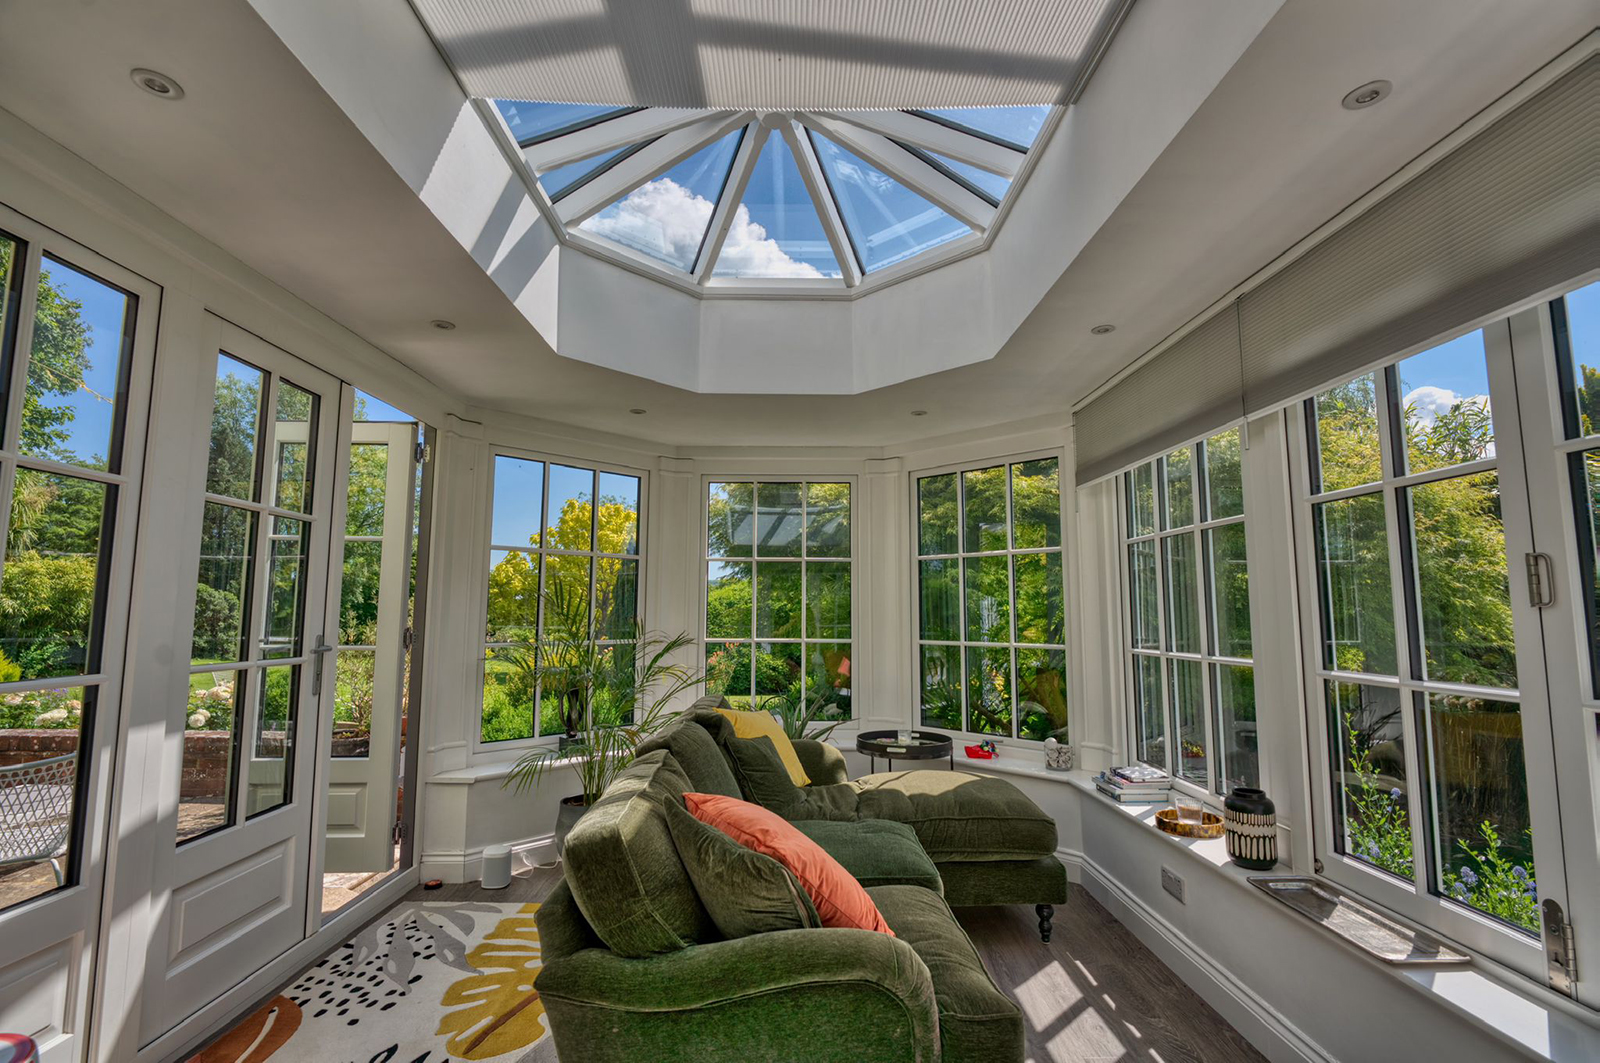 Goodwood Orangeries and Conservatories in Surrey, Hampshire and West Sussex